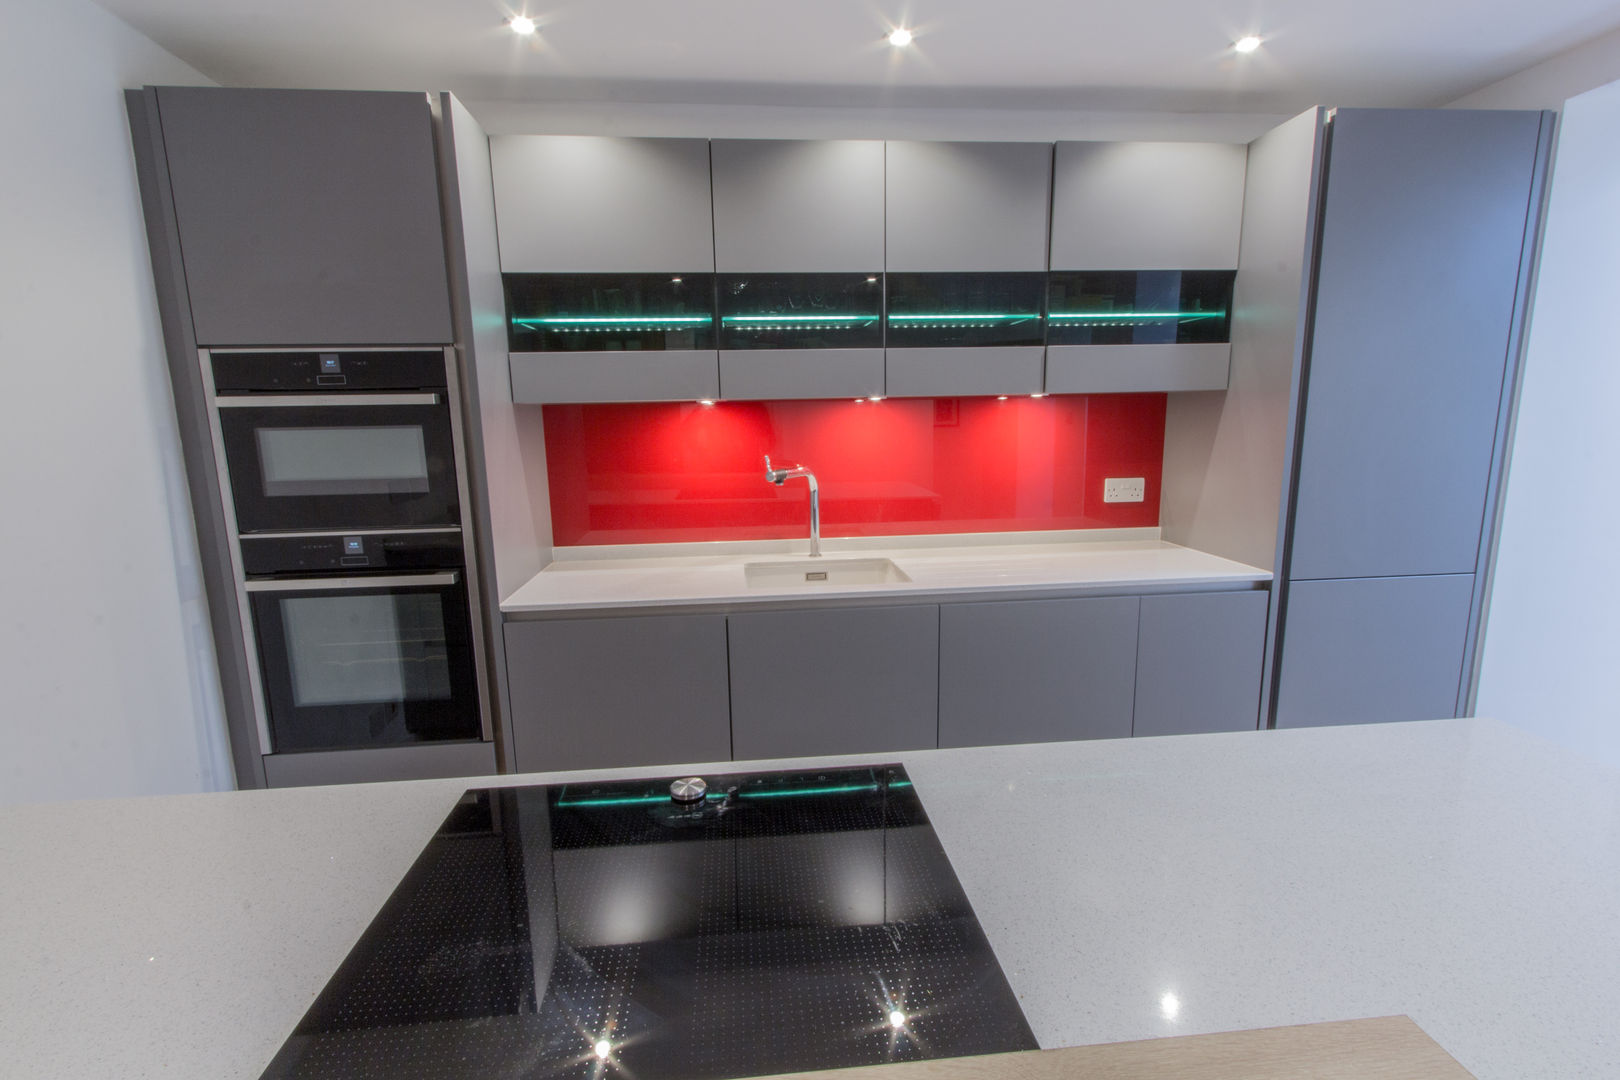 Grey & Red Eco German Kitchens Modern Kitchen MDF Nobilia,Twinkle White worktops,Neff oven,Neff combination microwave,Blanco sink and tap,Neff Induction hob,open plan galley style kitchen,glazed wall units